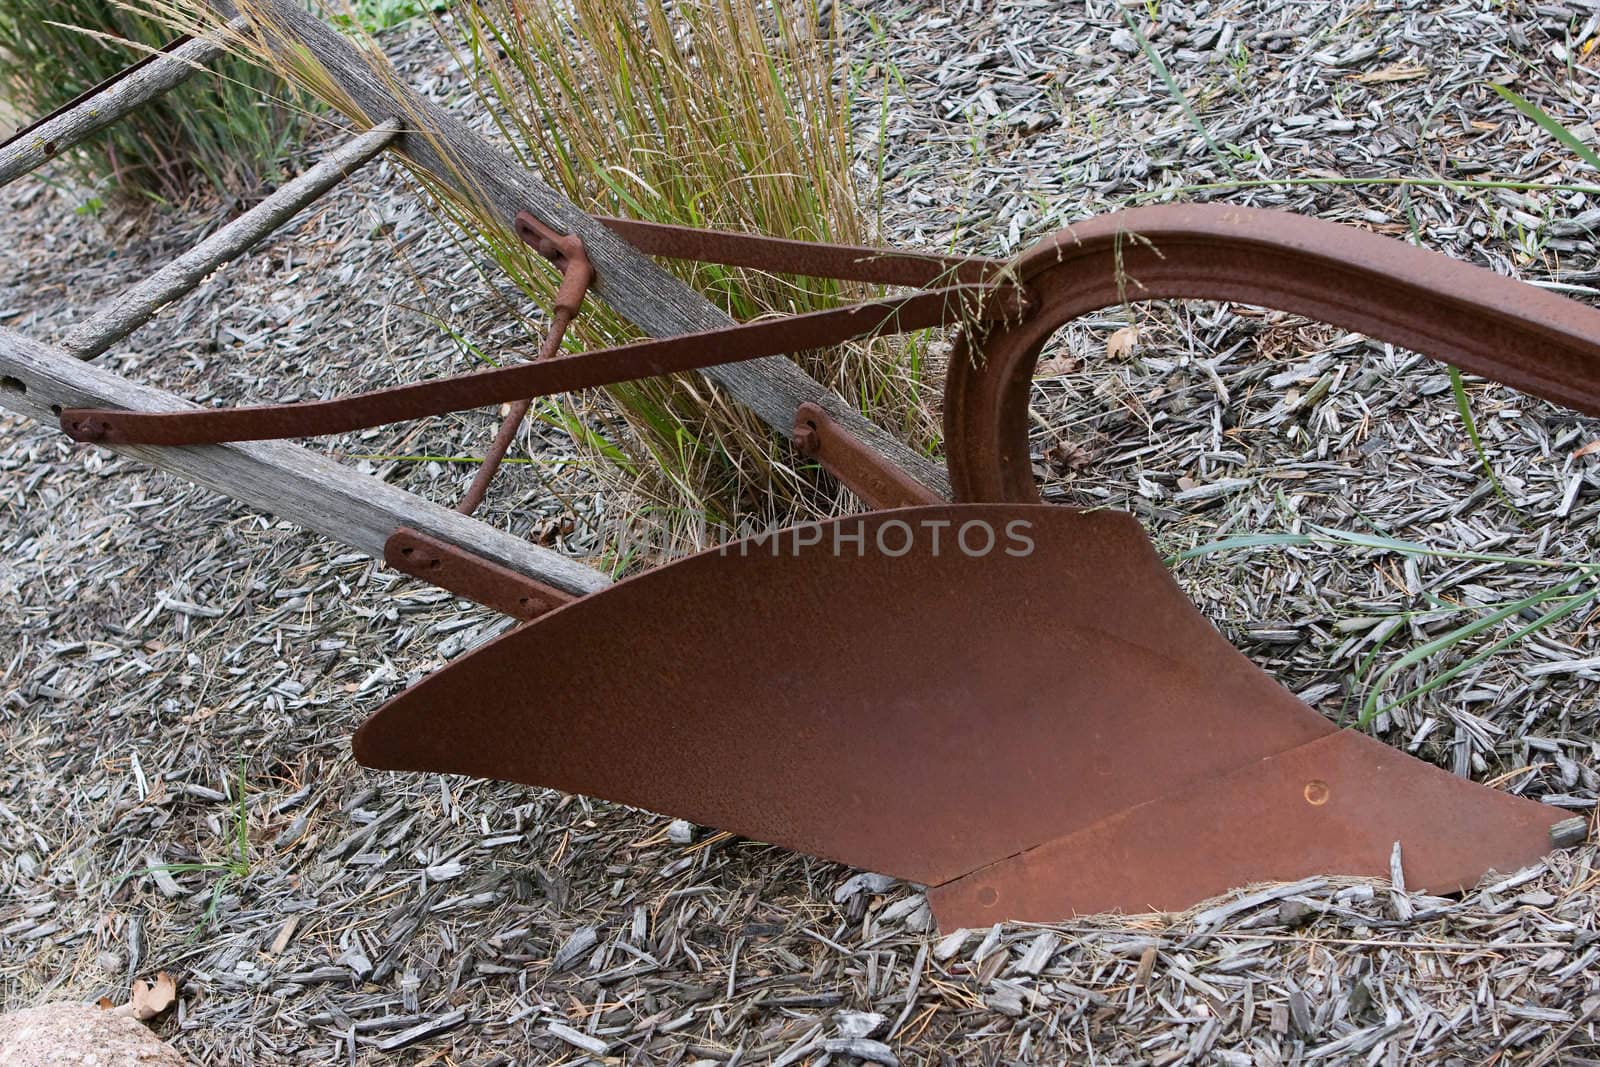 An antique plough sits quiet in the dirt.